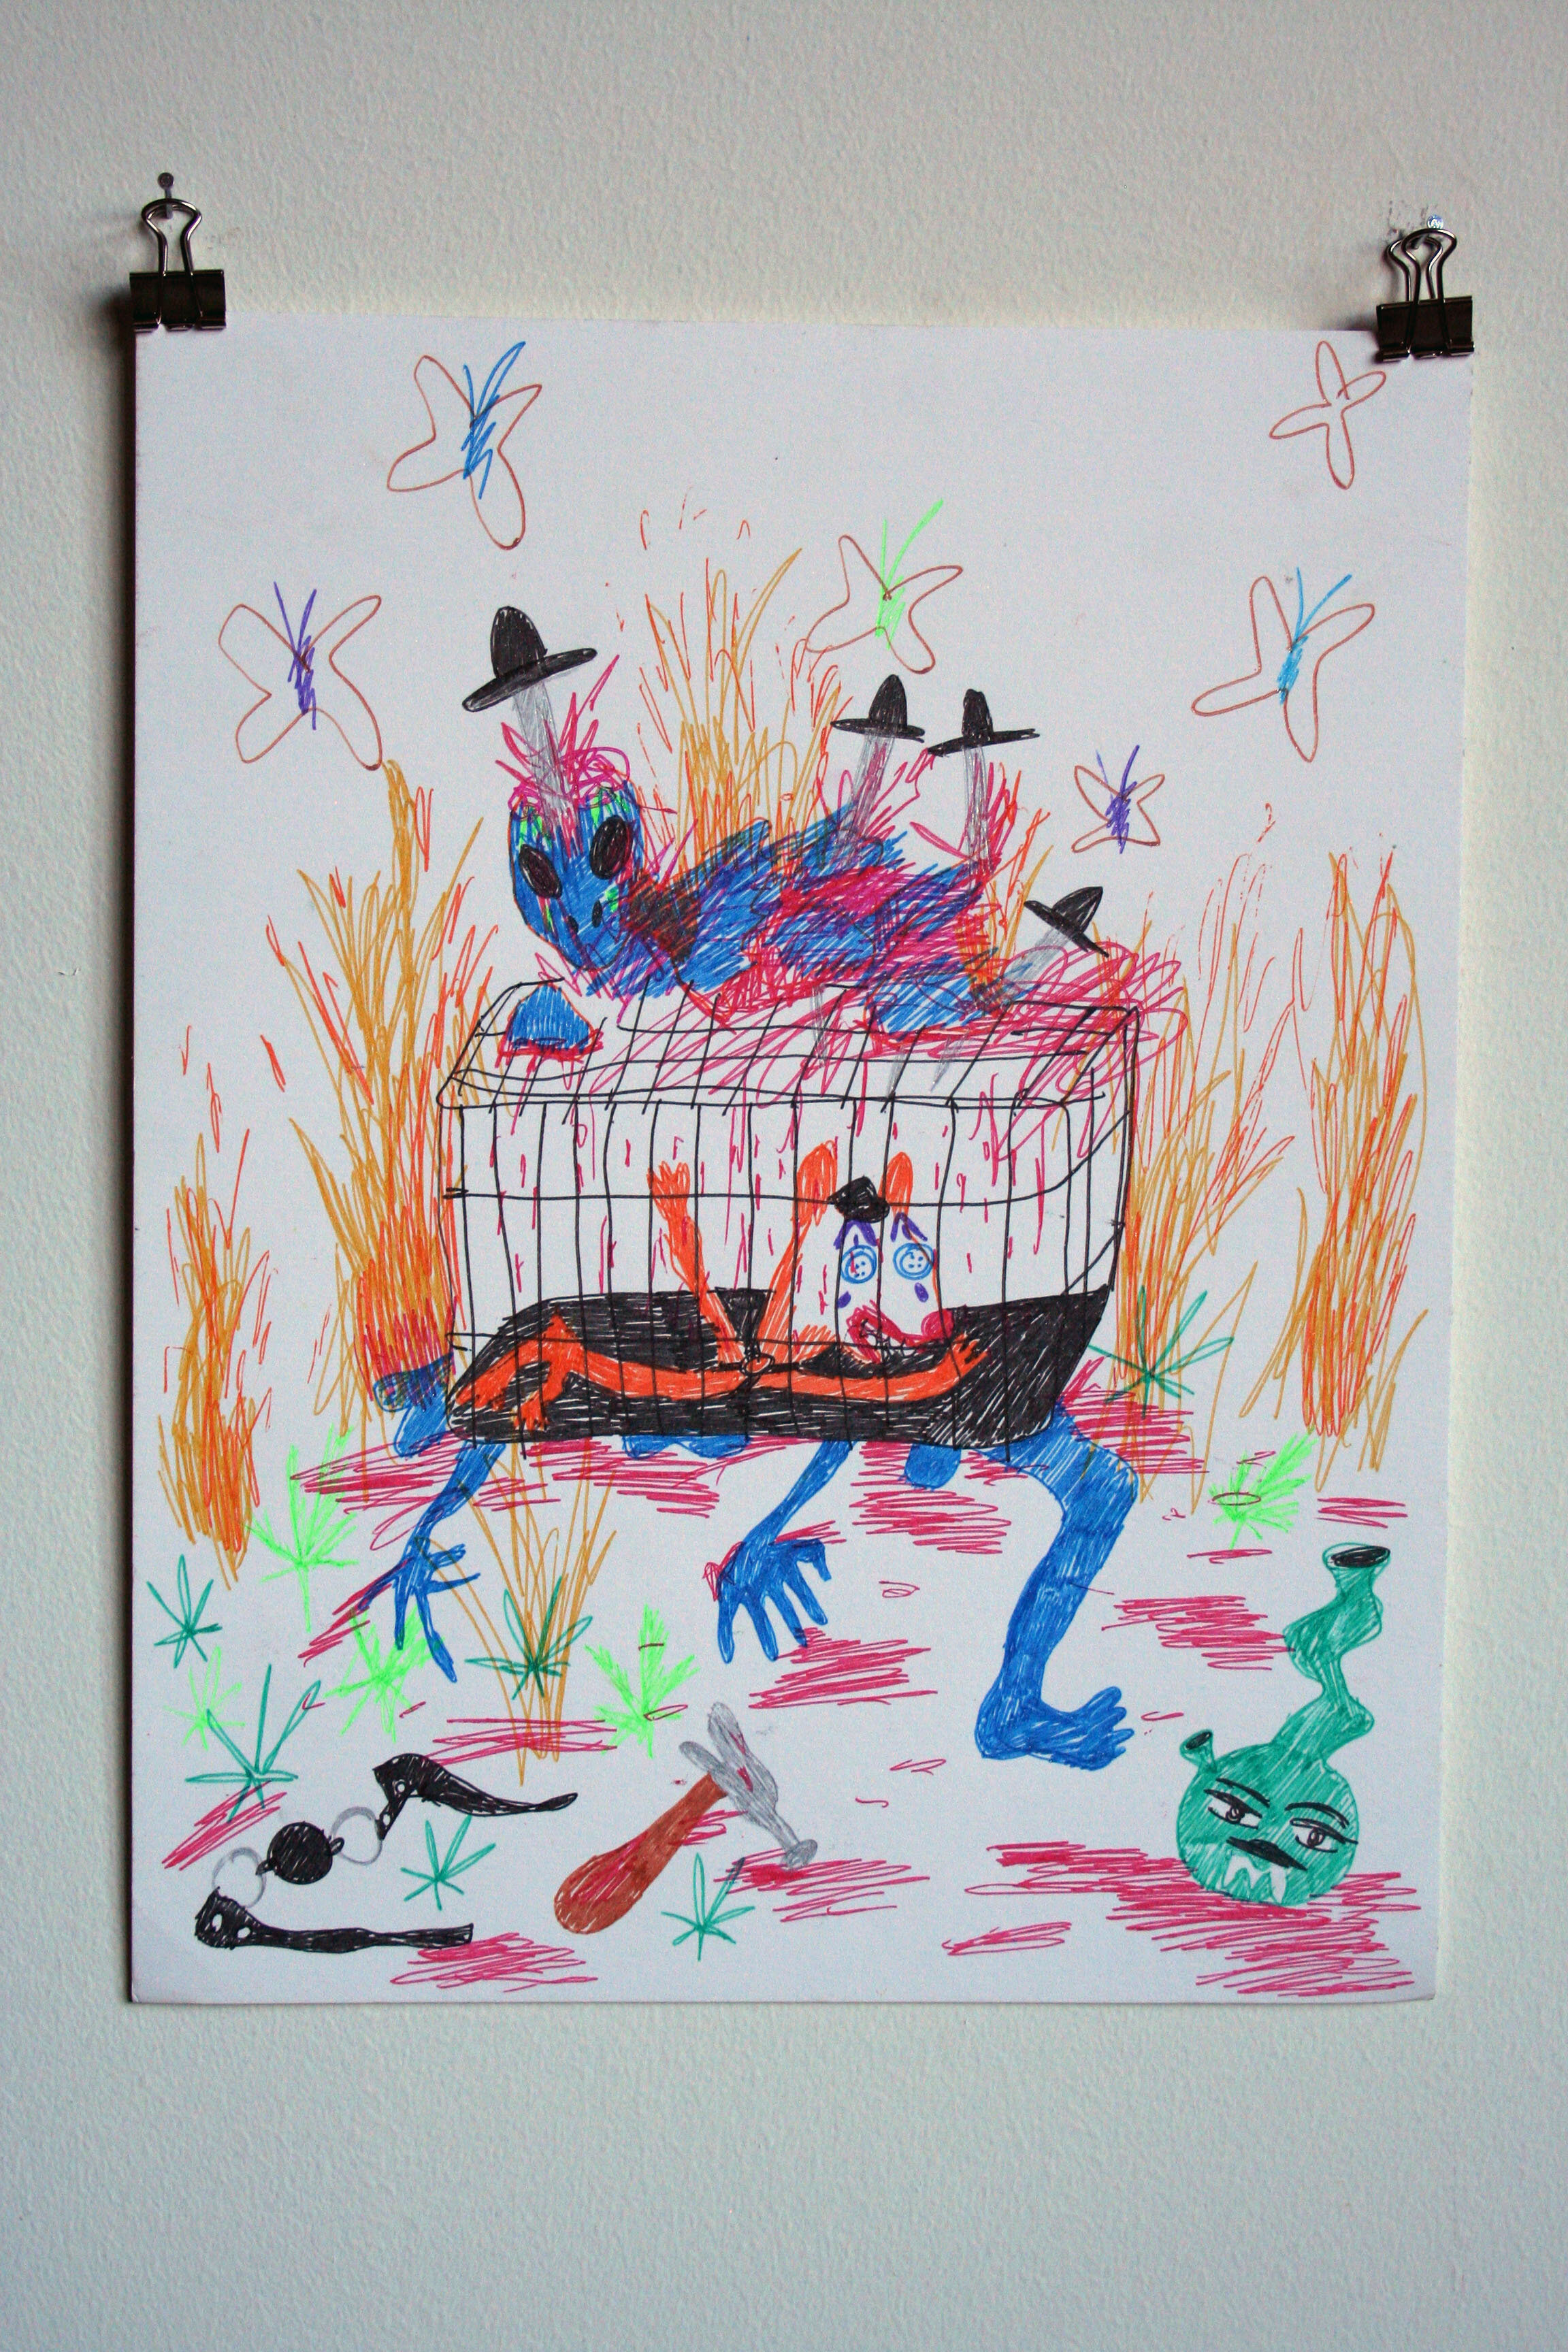   Flaming Cage,  2014  14 x 11 inches (35.56 x 27.94 cm.)  Sparkle gel pen on paper 